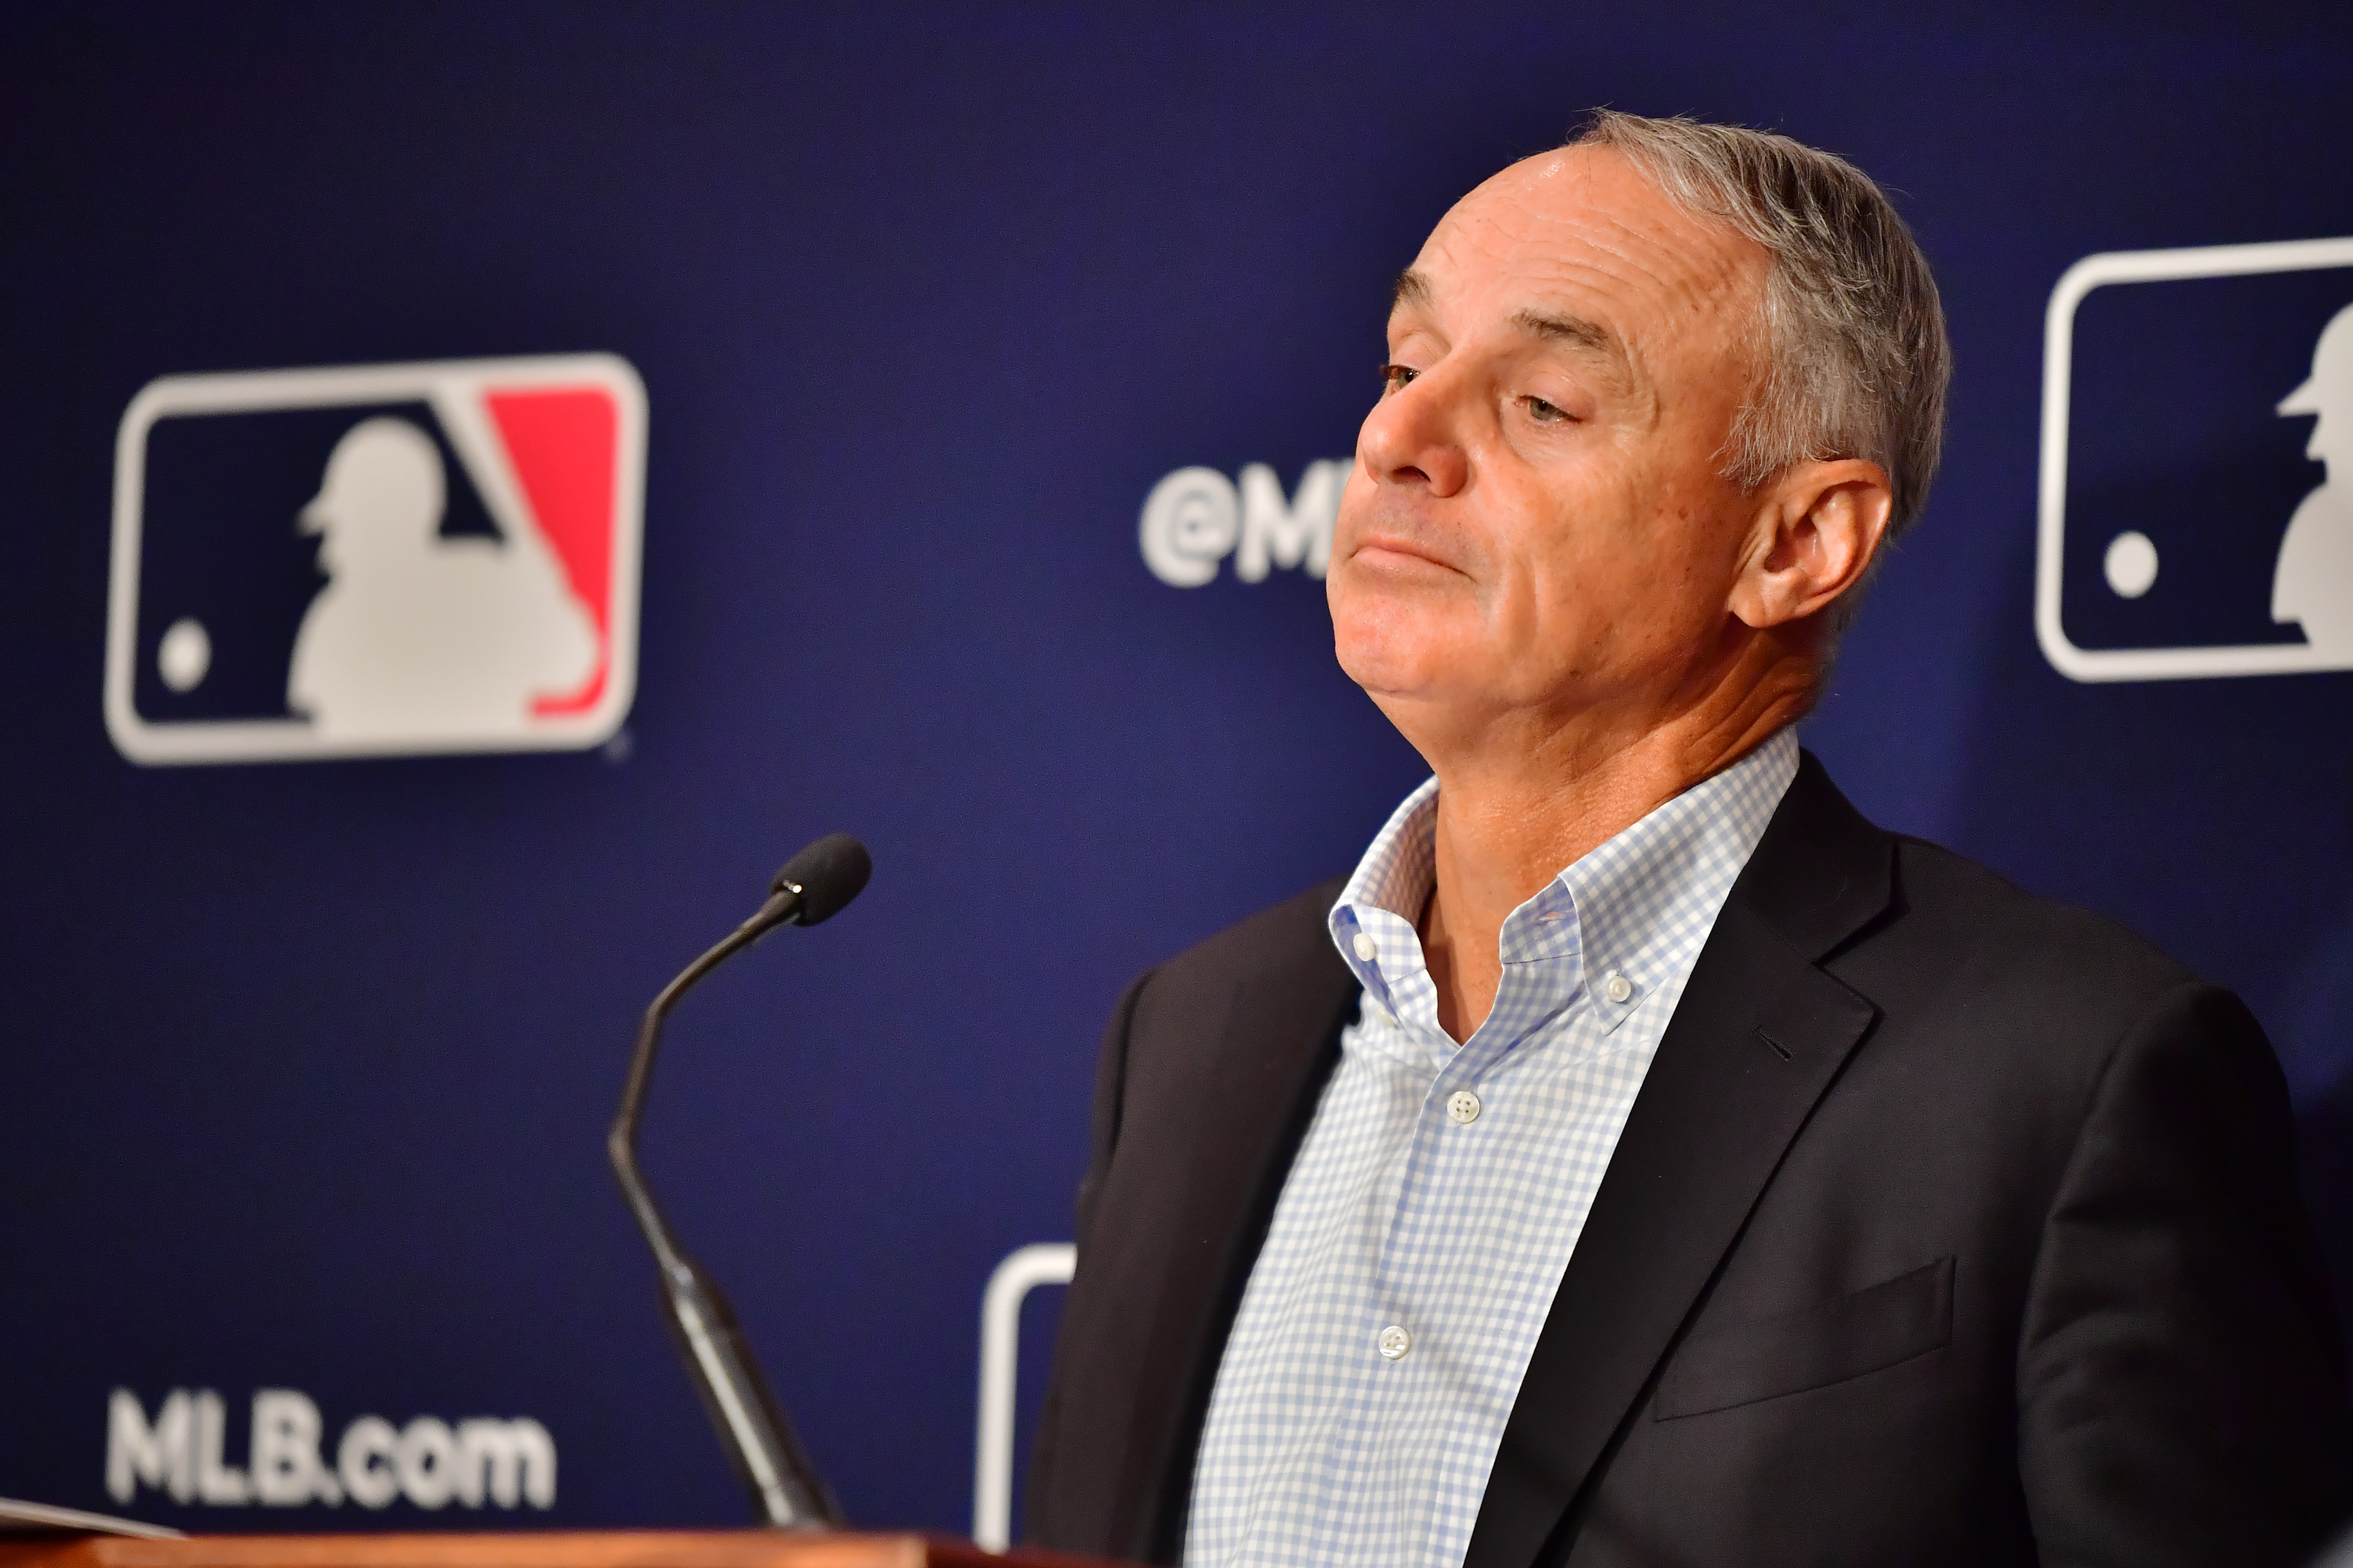 Major League Baseball Commissioner Rob Manfred answers questions during an MLB owner’s meeting at the Waldorf Astoria on February 10, 2022 in Orlando, Florida